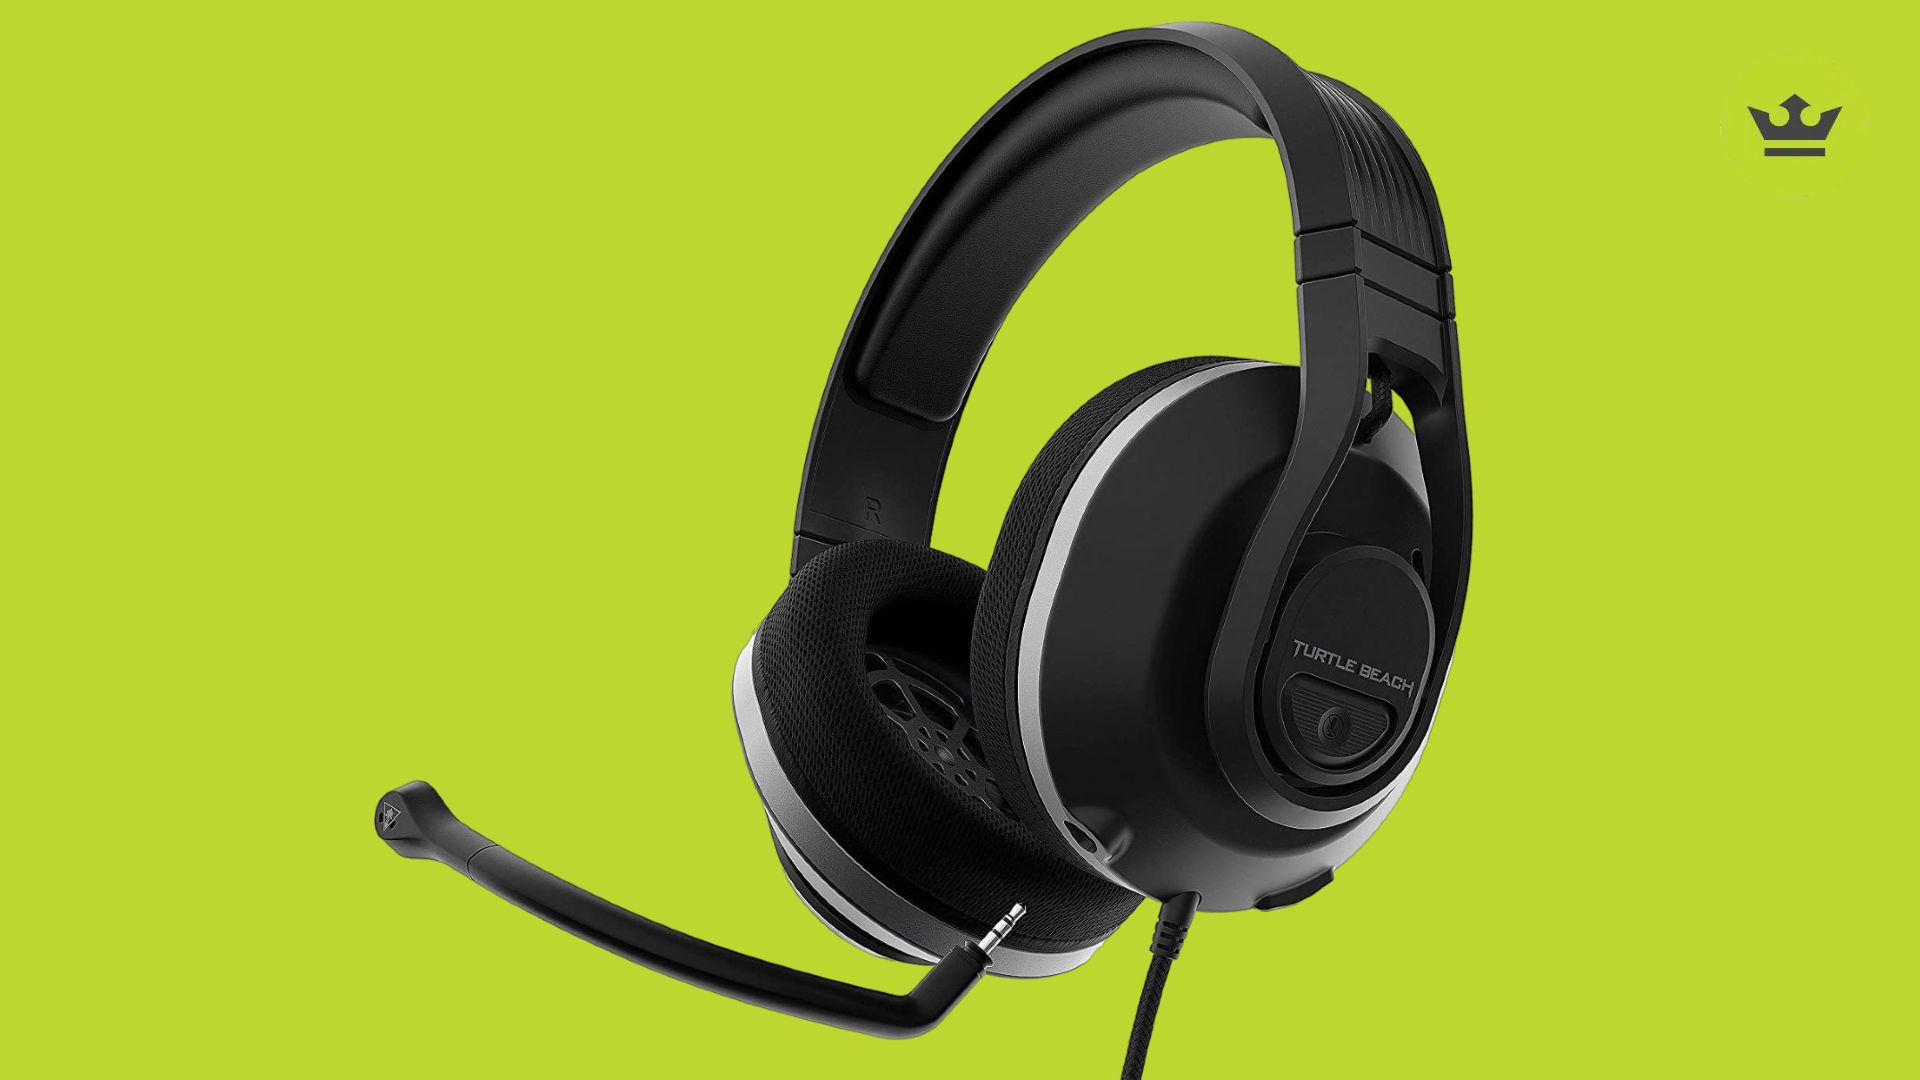 Best Cheap Gaming Headsets: The Turtle Beach Recon 500 can be seen